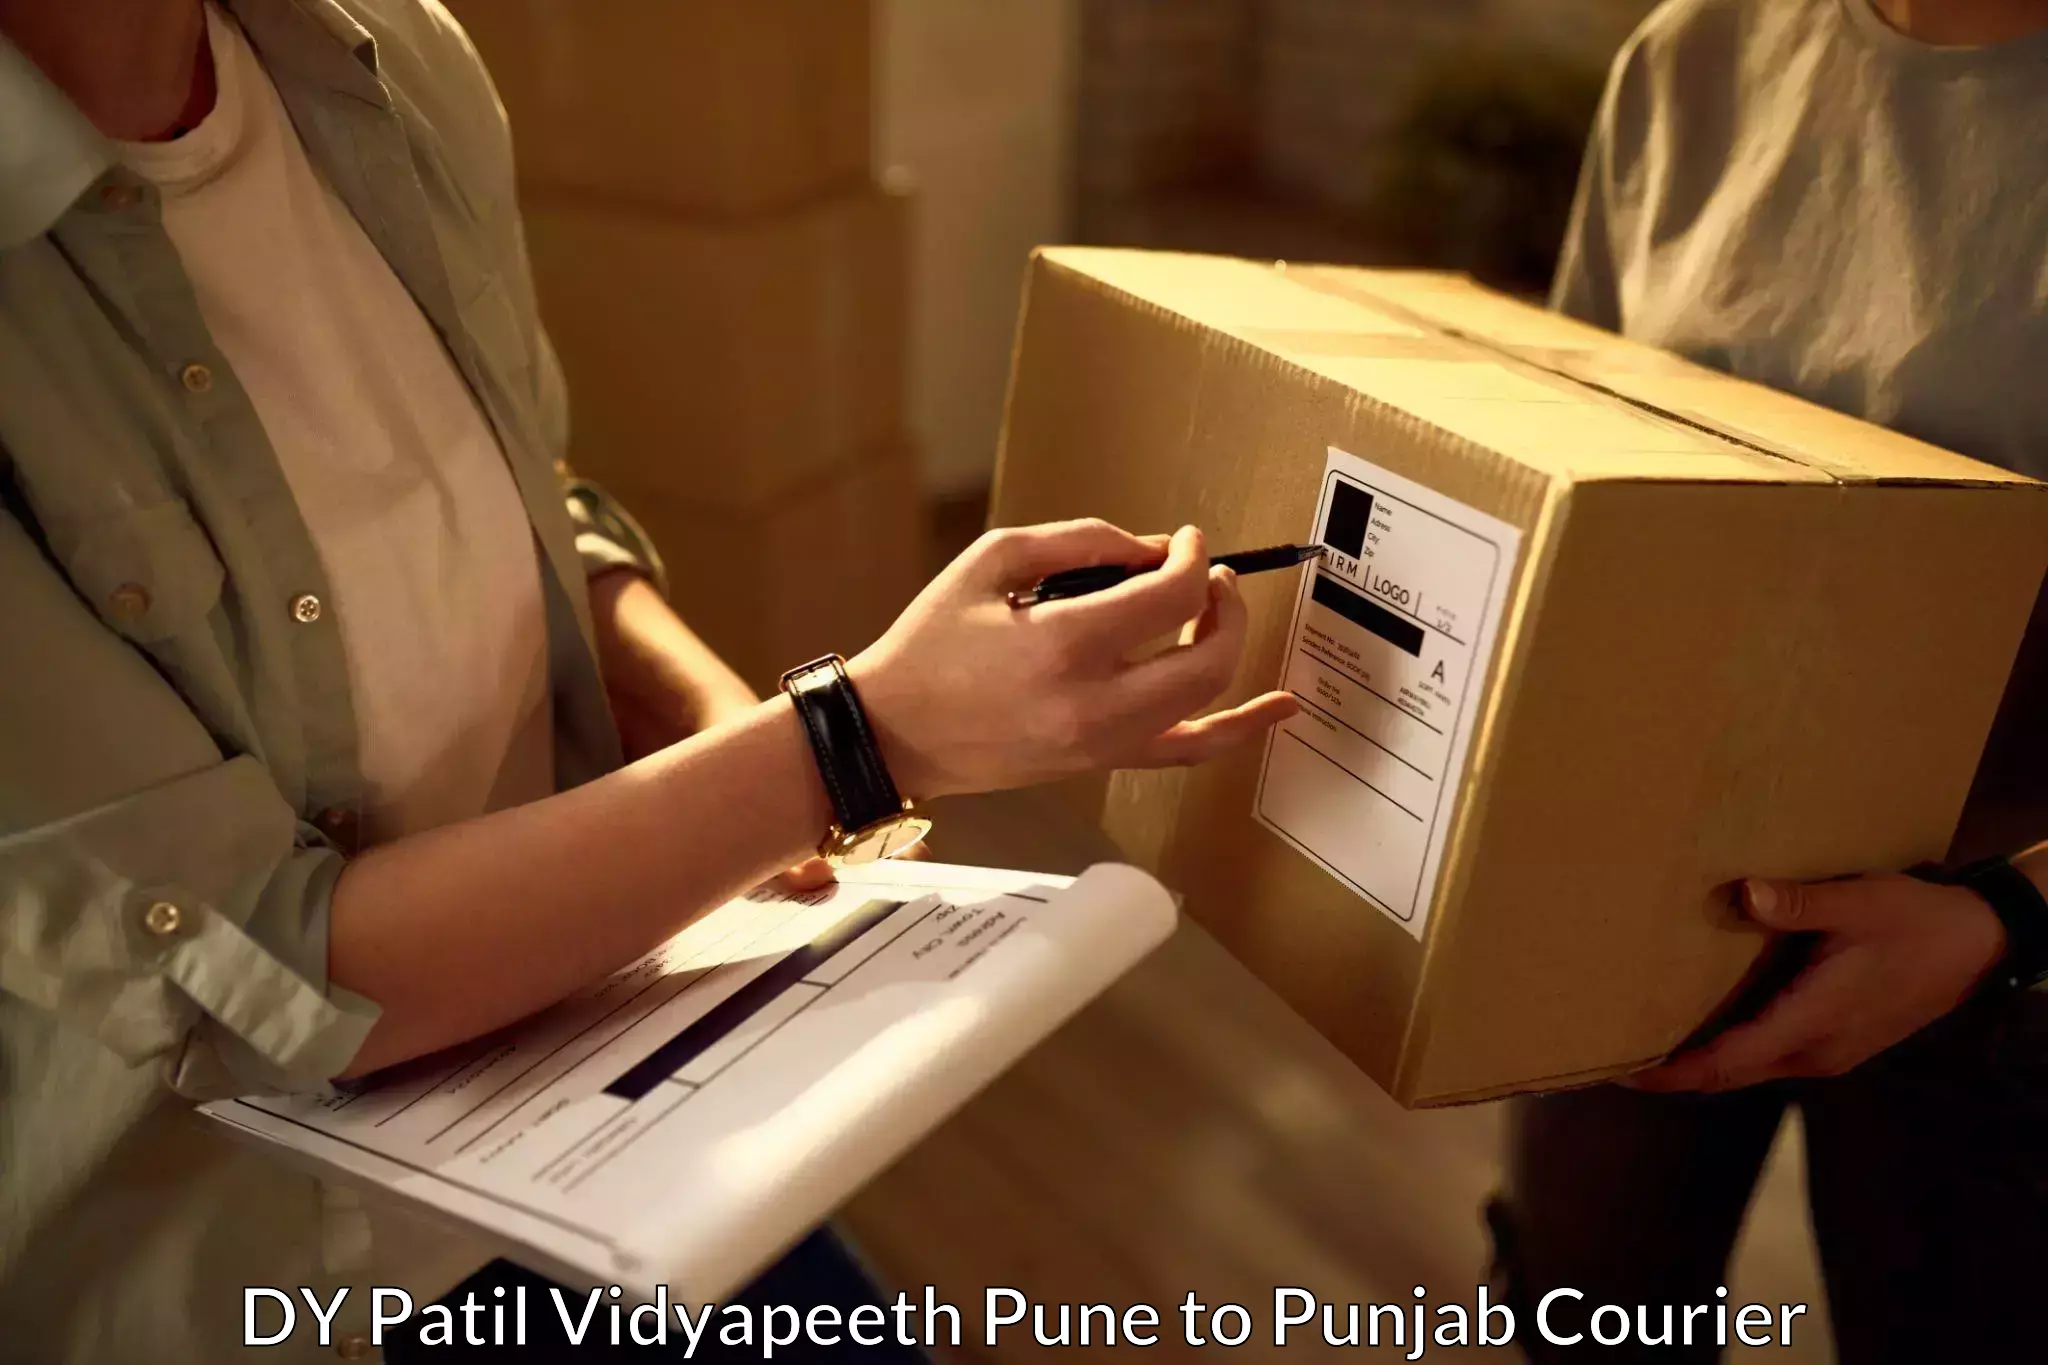 Residential courier service DY Patil Vidyapeeth Pune to Patran